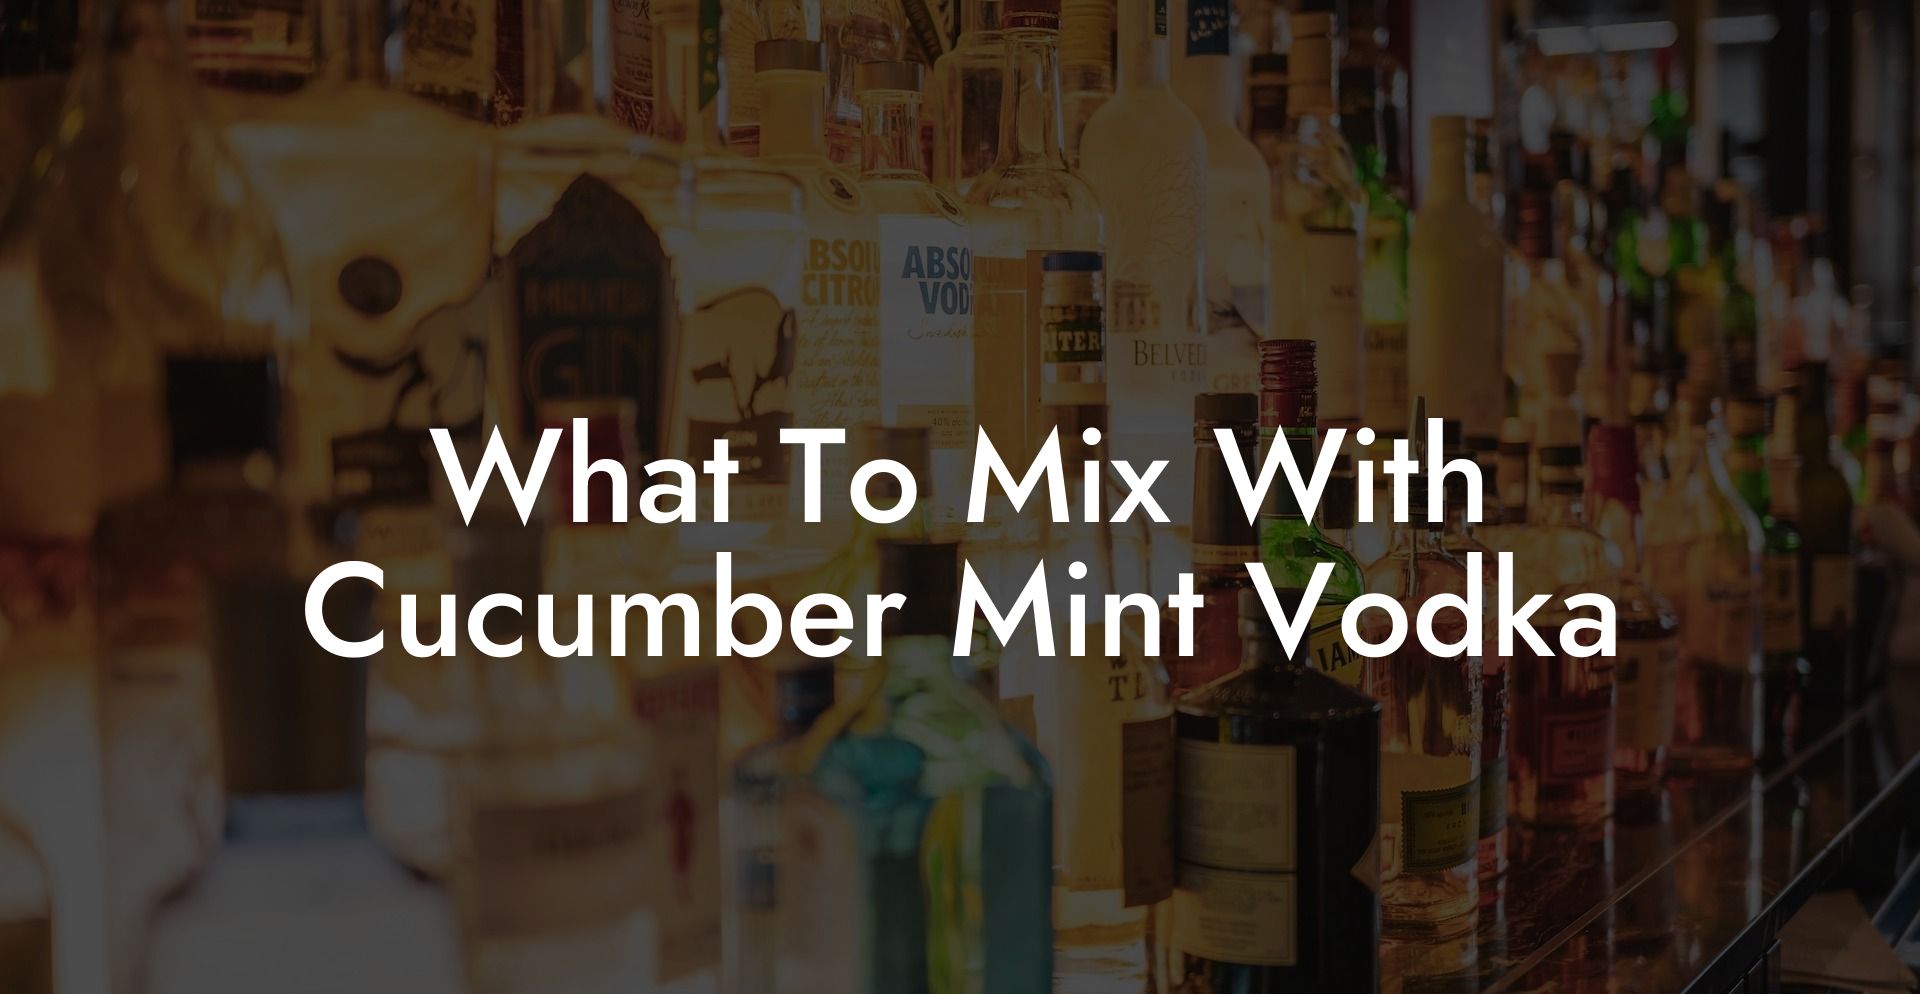 What To Mix With Cucumber Mint Vodka